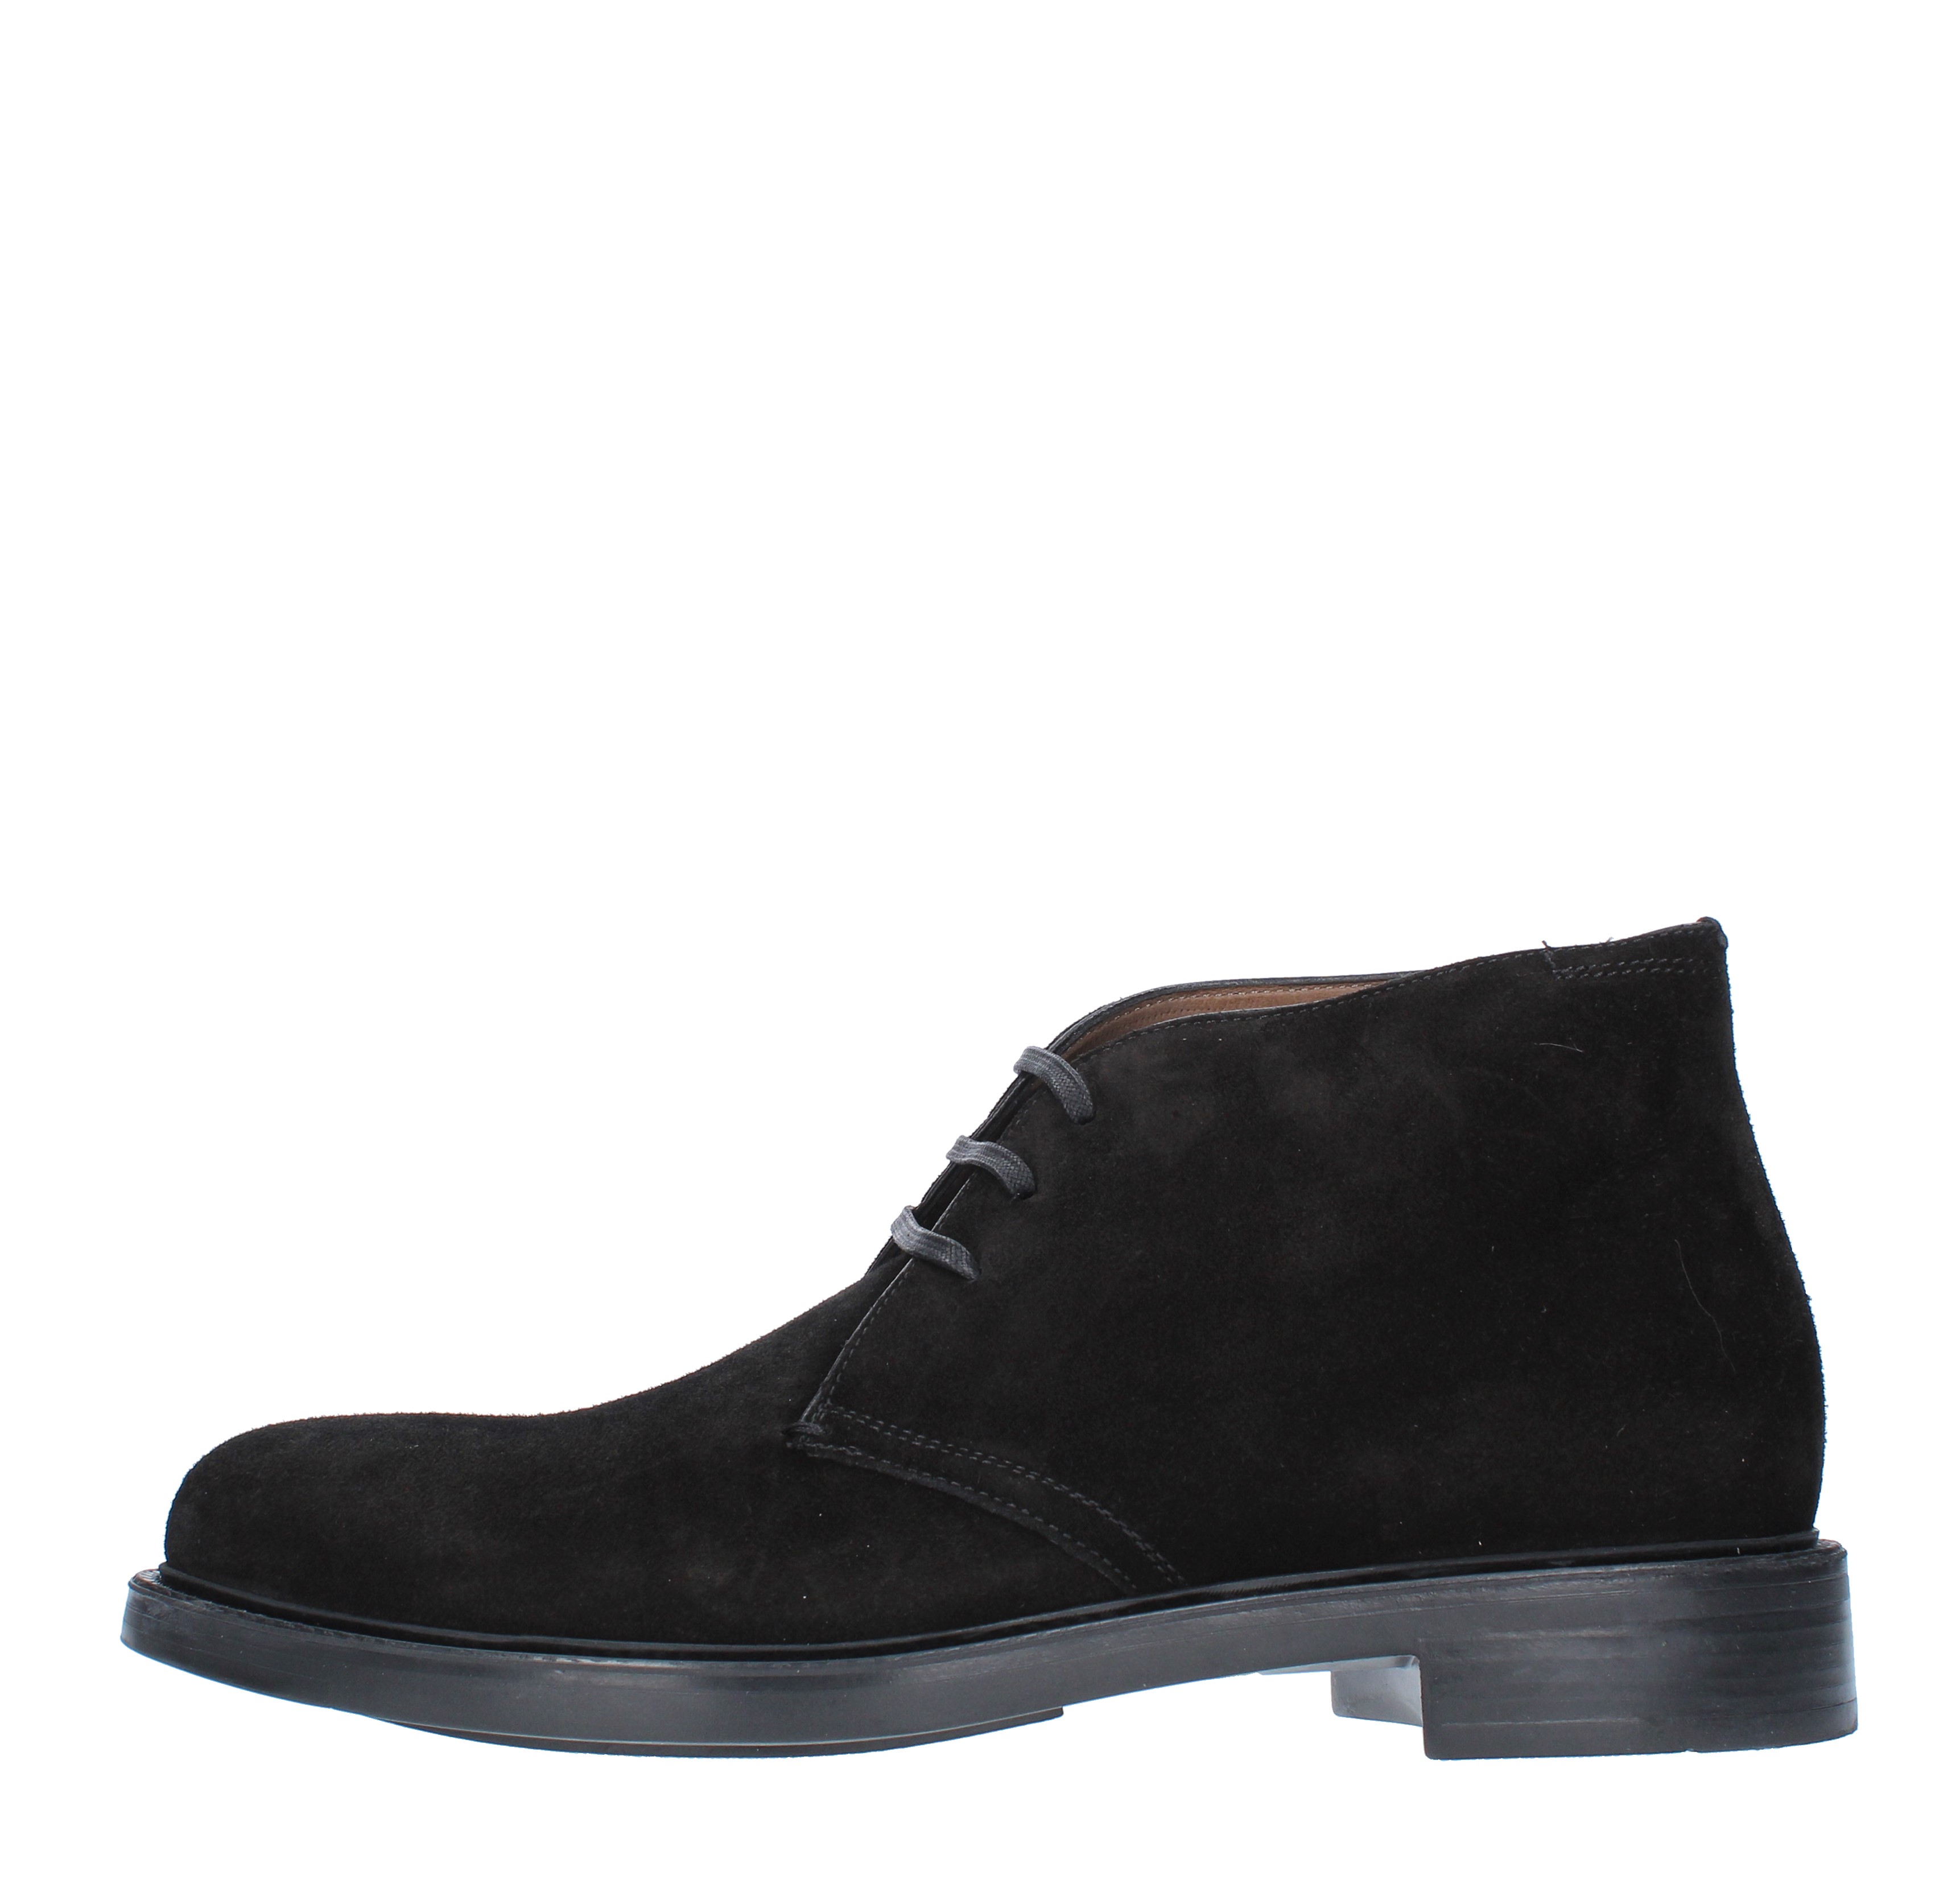 Suede ankle boots model 206-02 - TRIVER FLIGHT - Ginevra calzature